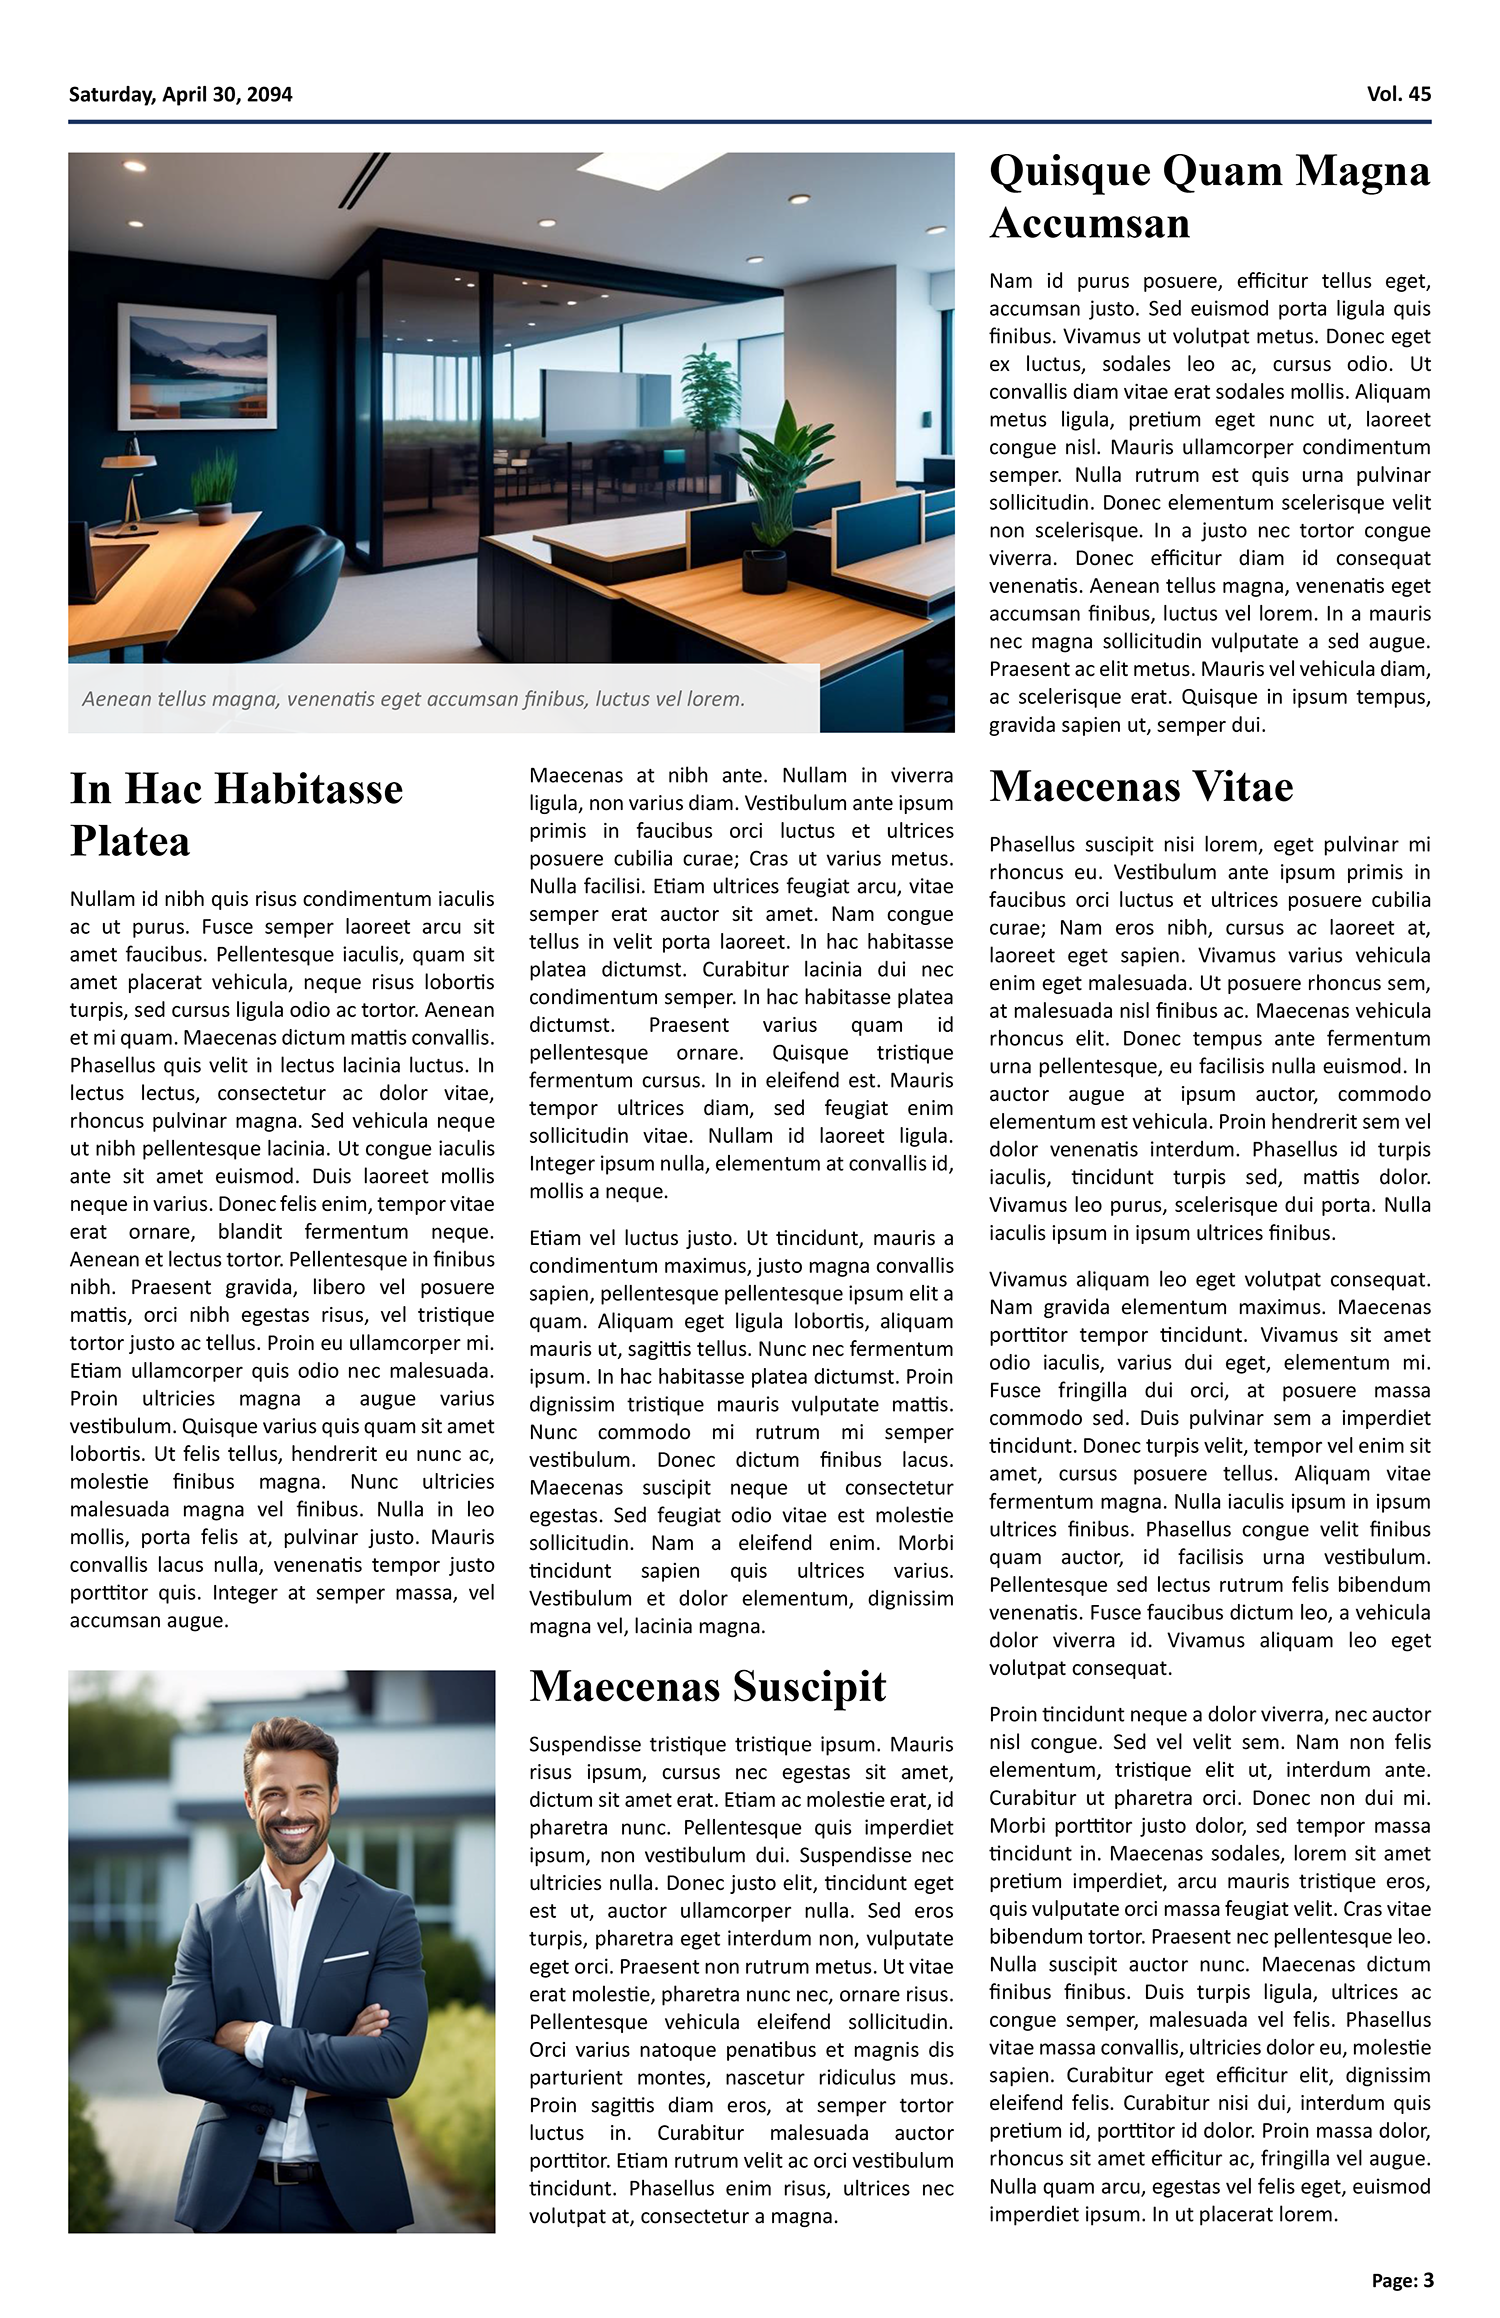 Professional Newspaper Article Template - Page 03